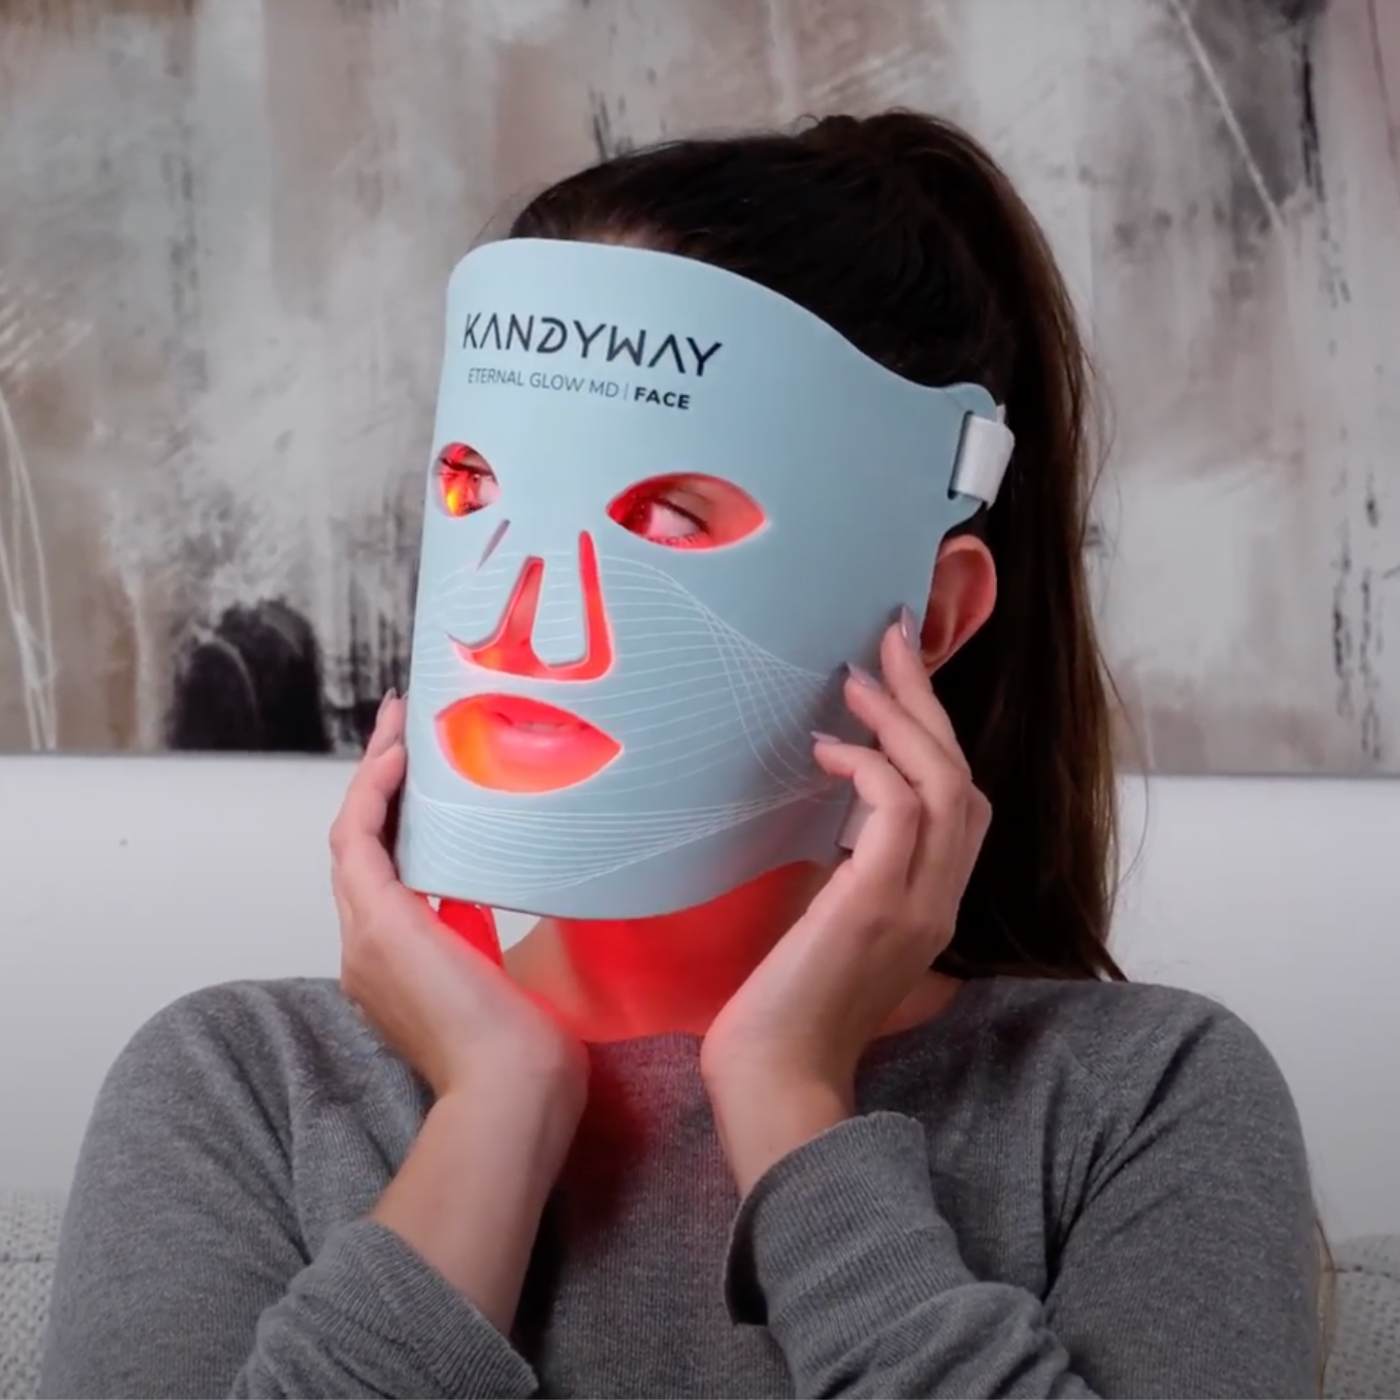 Kandyway Eternal Glow - Red Light Therapy Mask